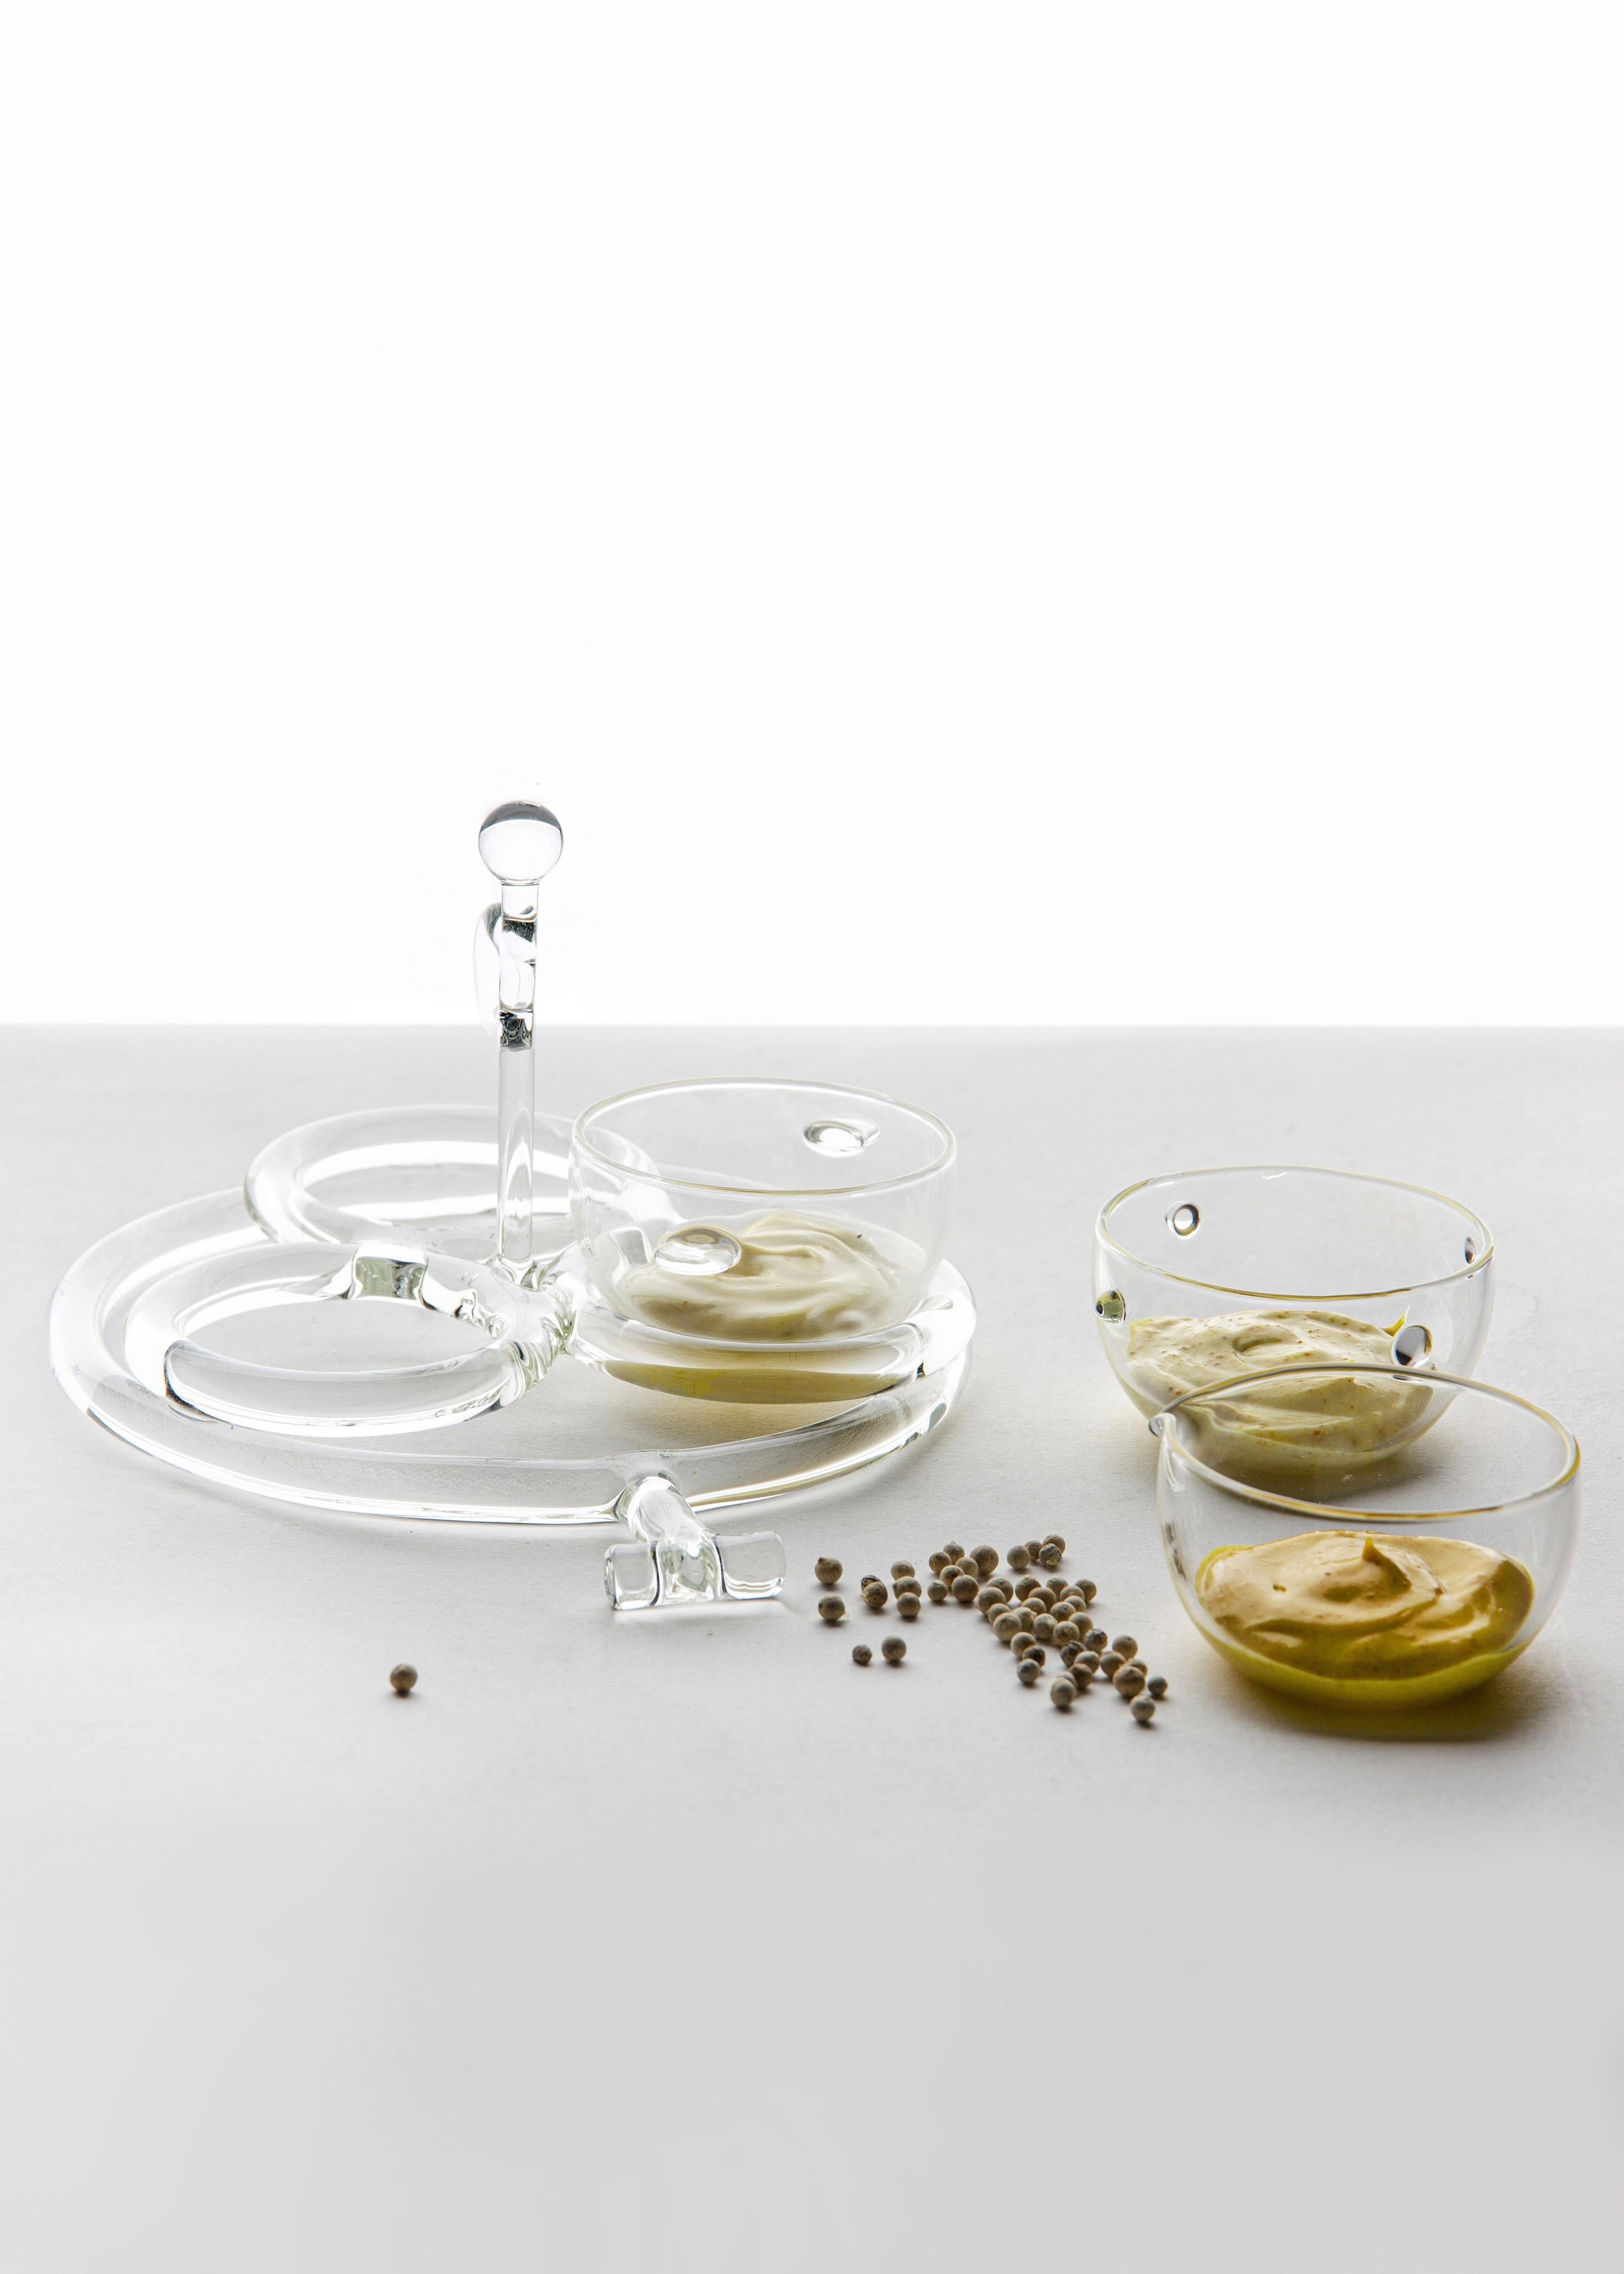 Sauce Boat from SiO2 Tableware collection

Three bowls placed on their base, here is the most elegant way to bring sauces and spices
to the table.
Part of the SiO2 tableware collection, it has an aesthetic linked to the world of chemistry
and